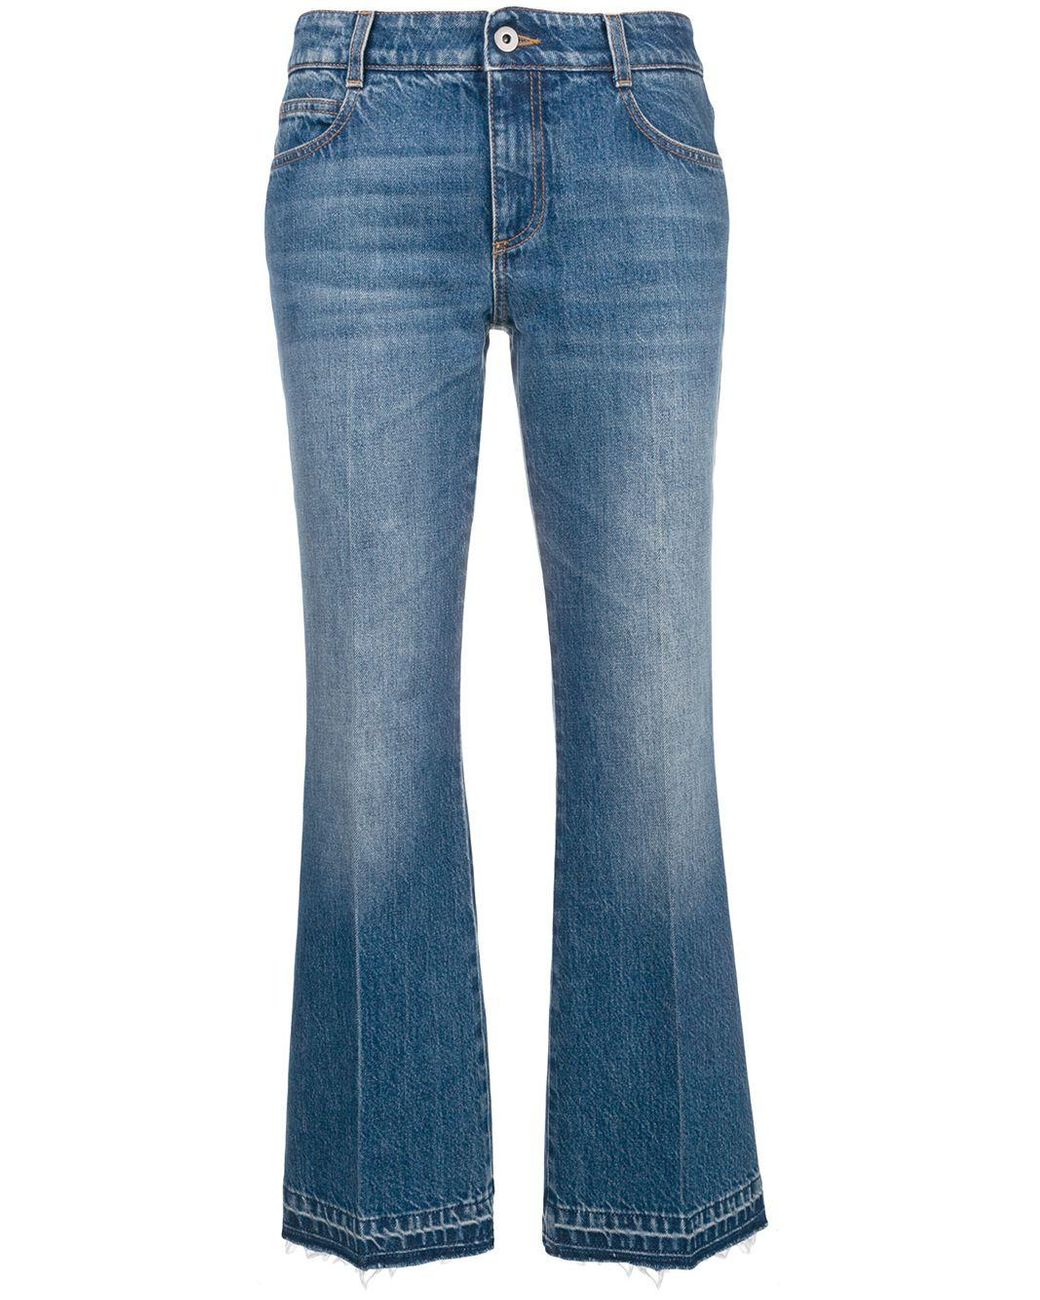 Stella McCartney Cropped Flared Jeans in White (Blue) - Save 35% - Lyst